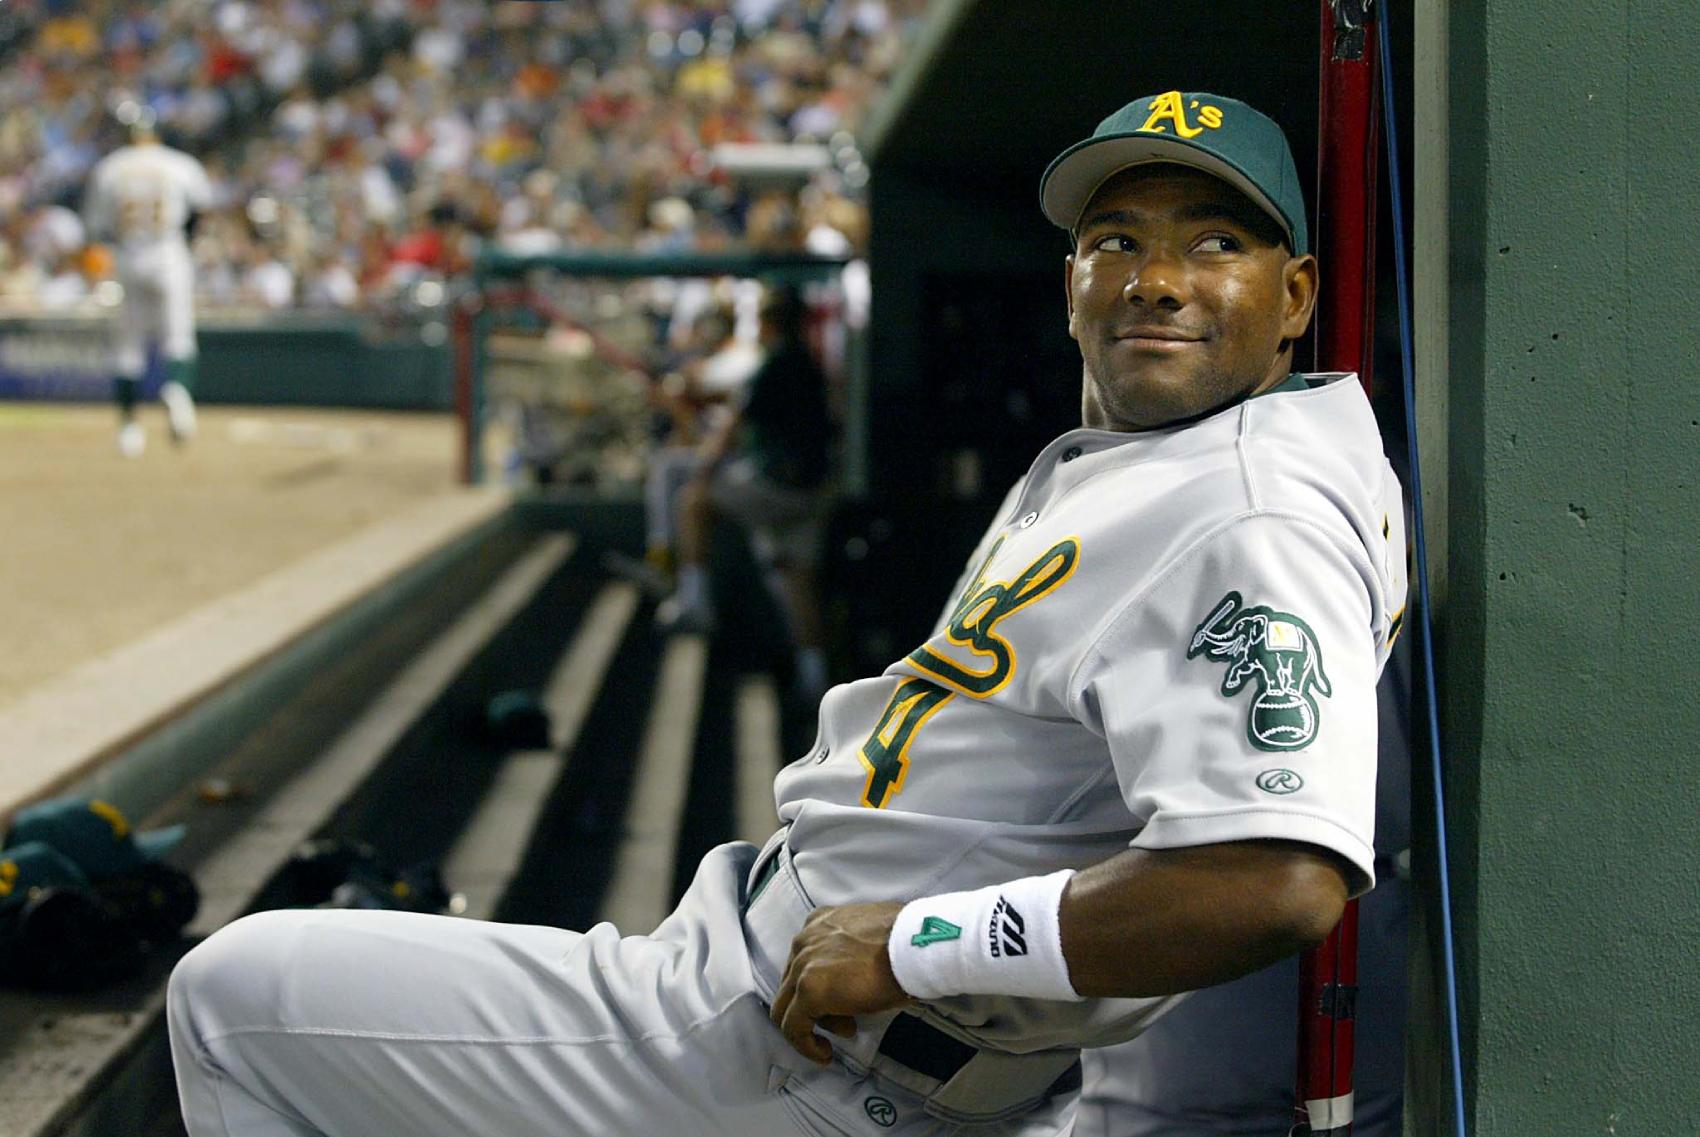 MLB All-Star Miguel Tejada became a chicken farmer in retirement and reportedly filed for bankruptcy in 2015.